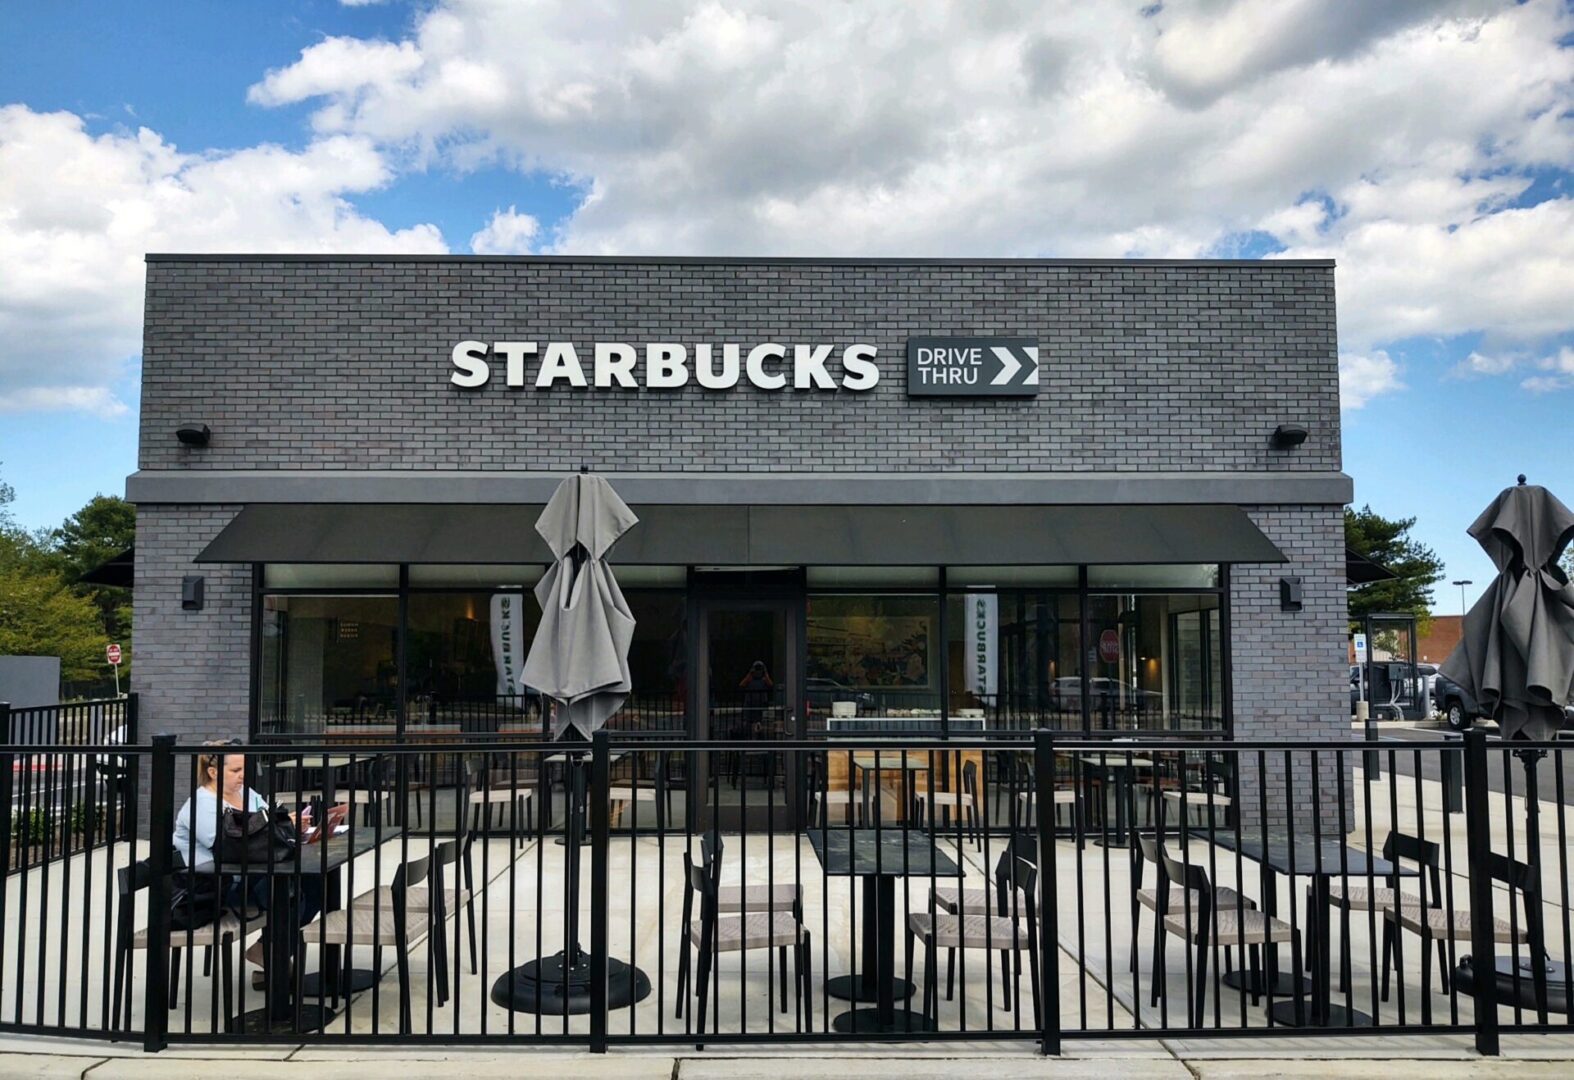 A Starbucks with outdoor seating